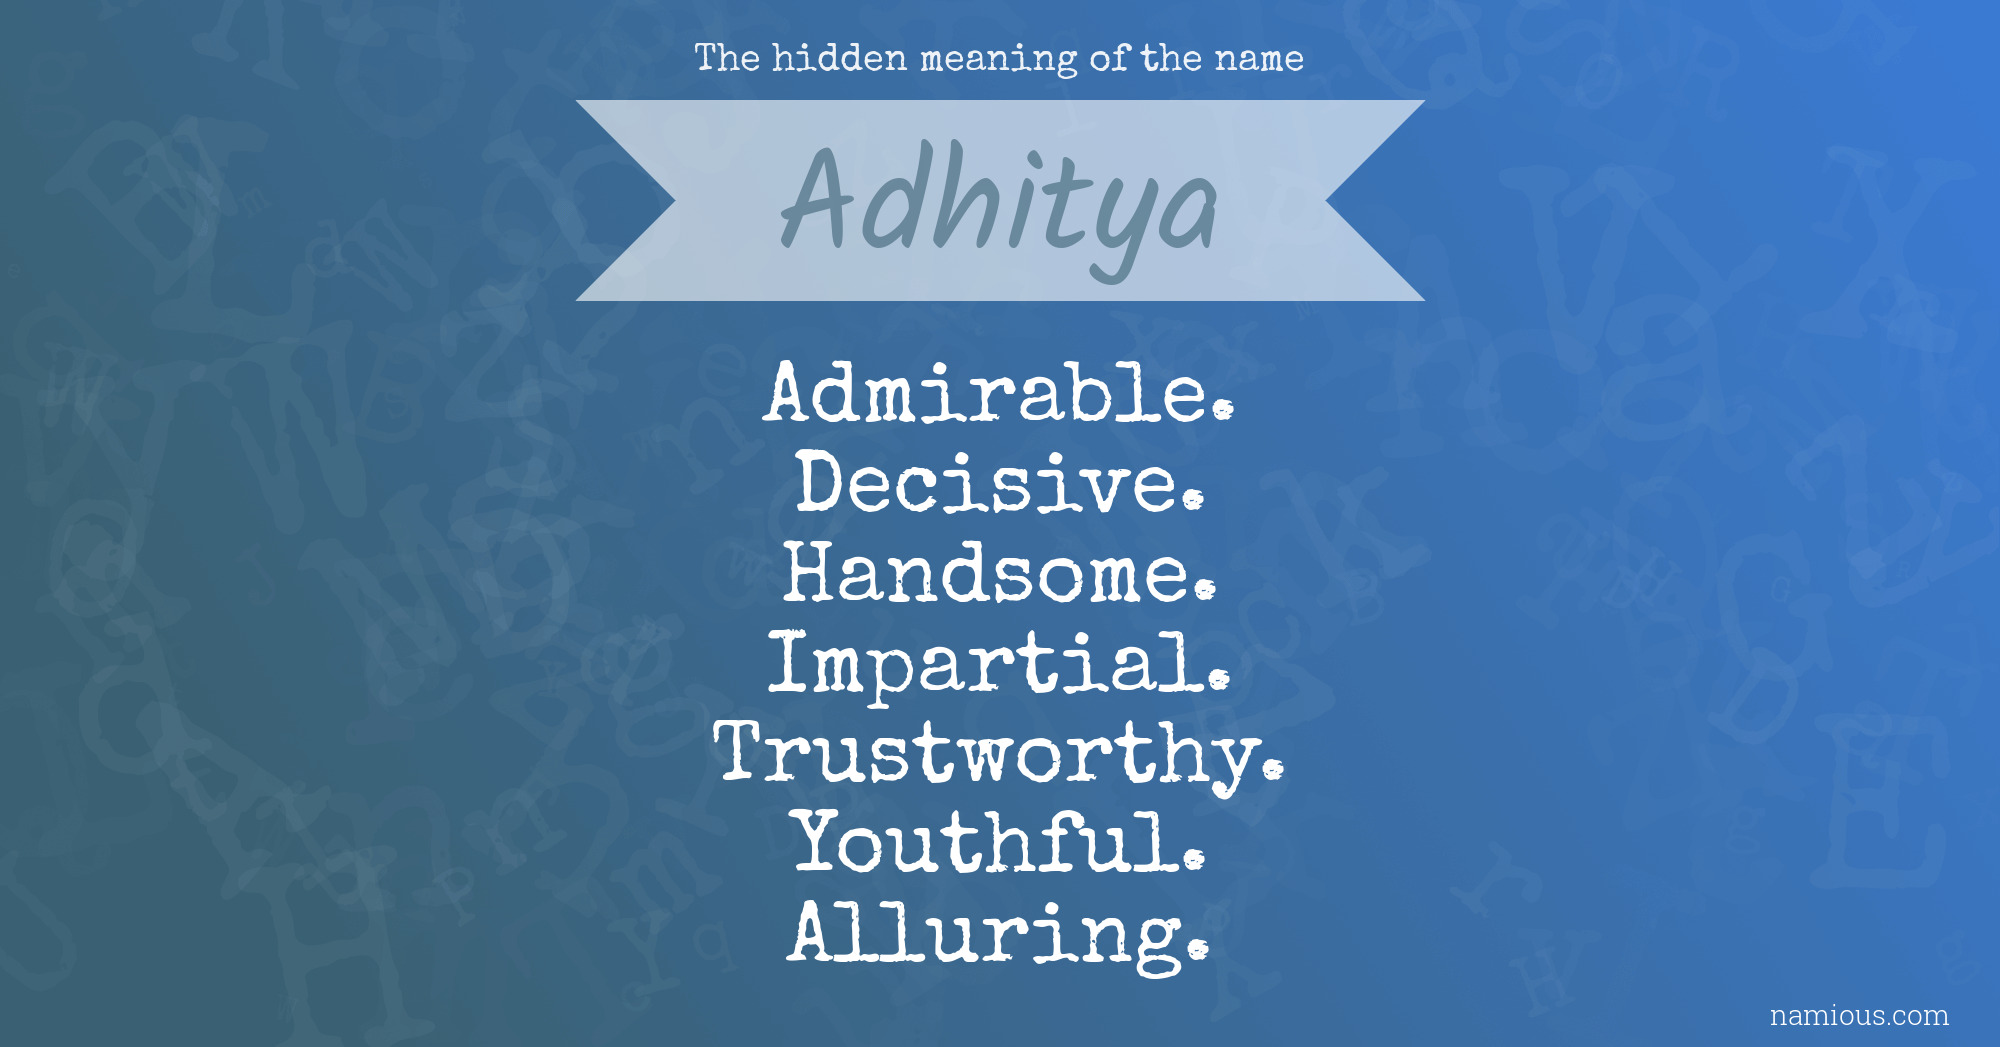 The hidden meaning of the name Adhitya